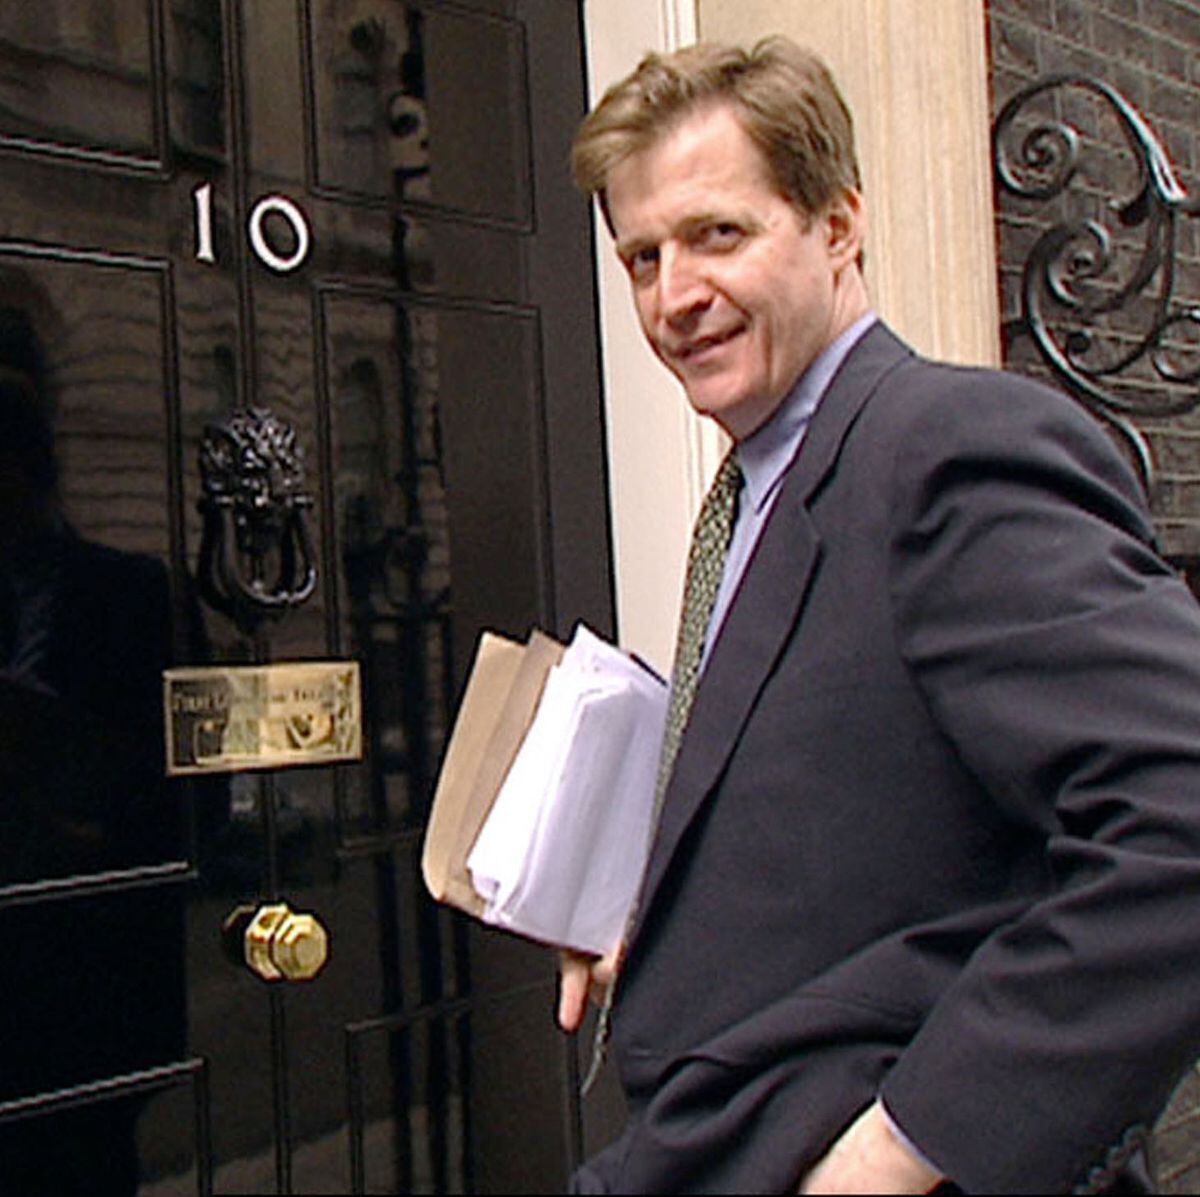 Who’s there? – Alastair at the door of Number 10 Downing Street